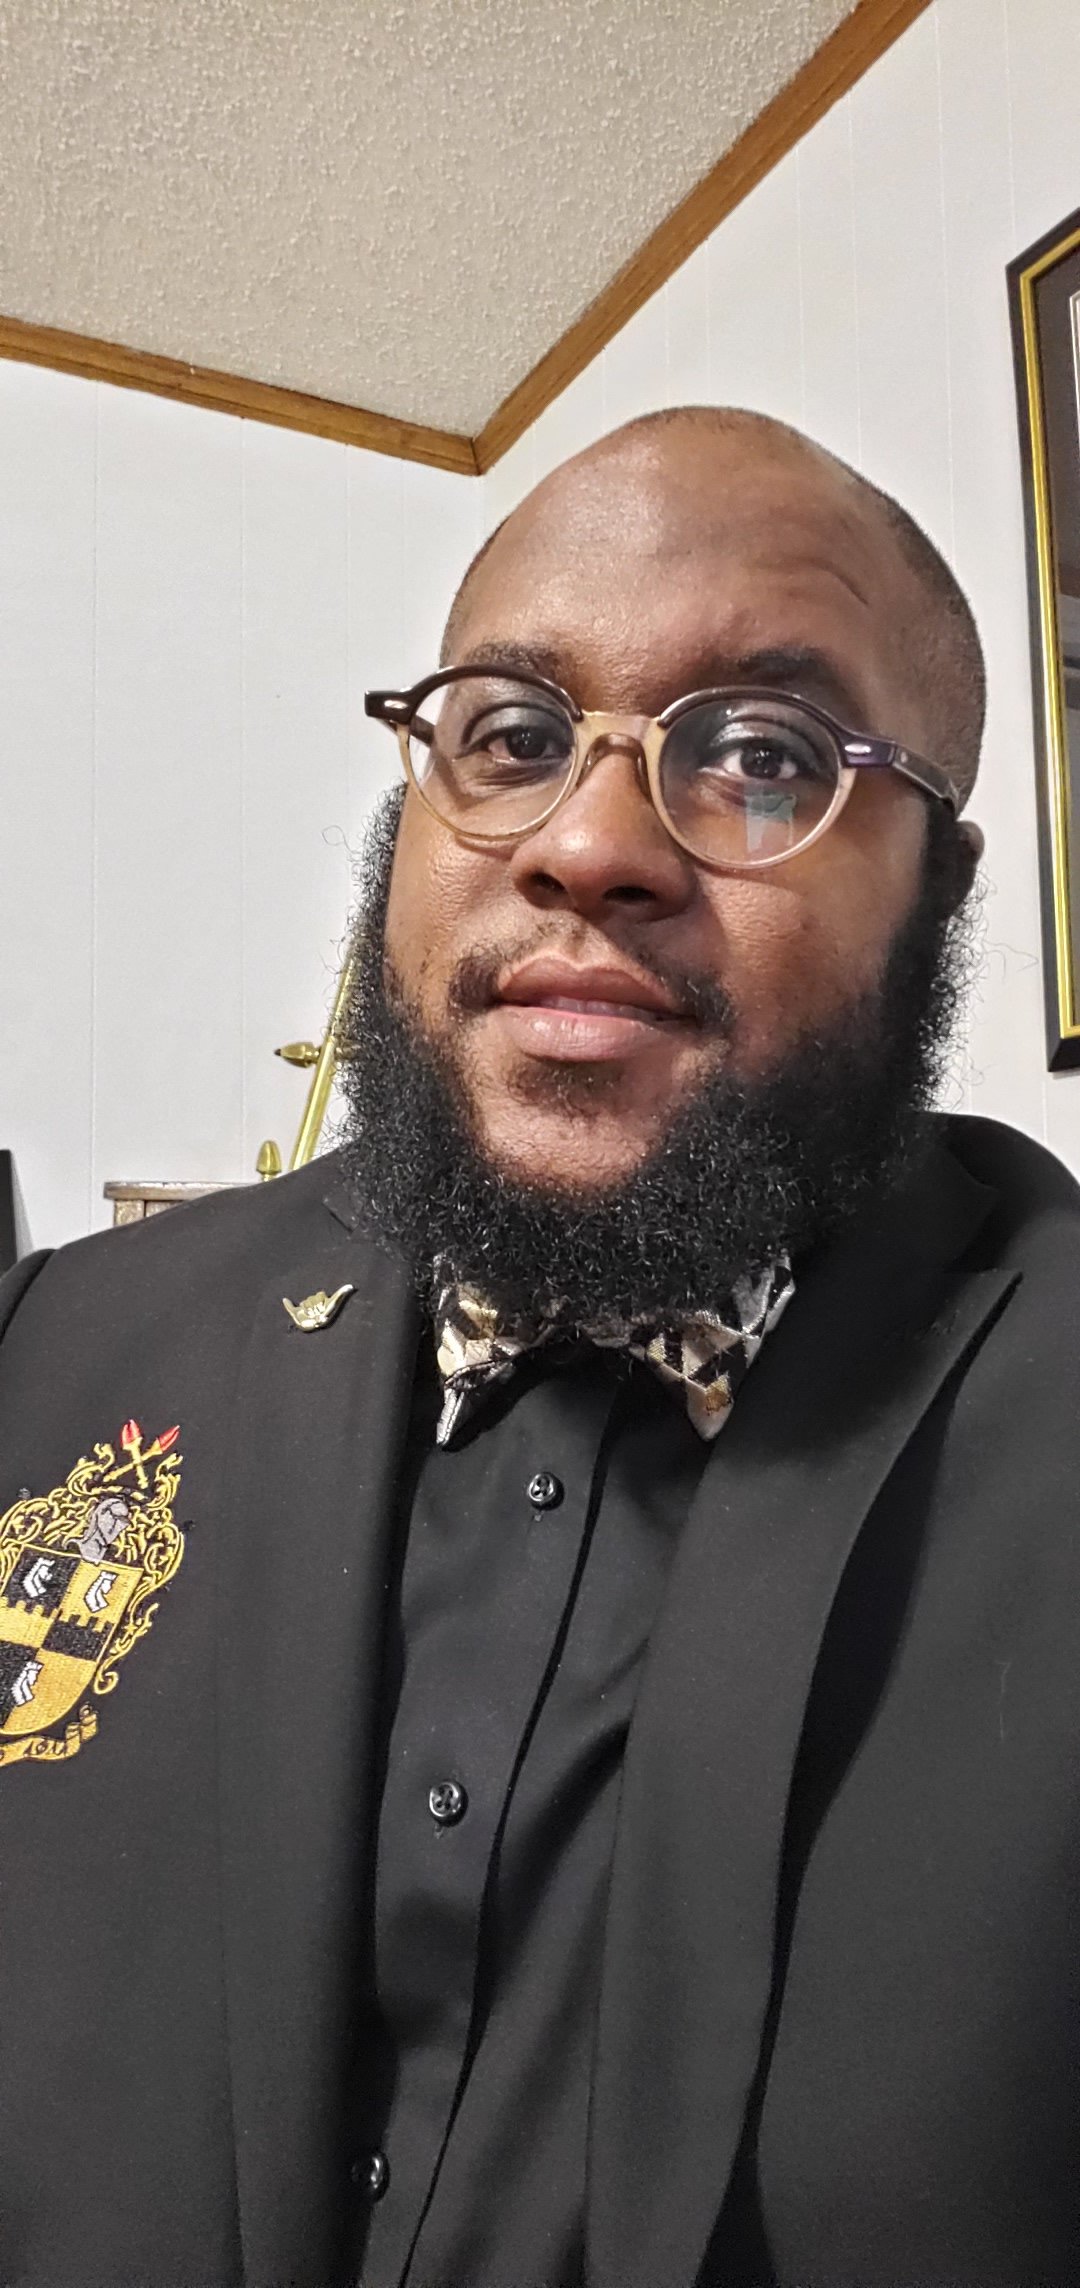 A man with purpose and vision, chasing after GOD's heart. Know me to understand me! Full Time Educator! ΑΦA https://t.co/ghjZ7roTI7